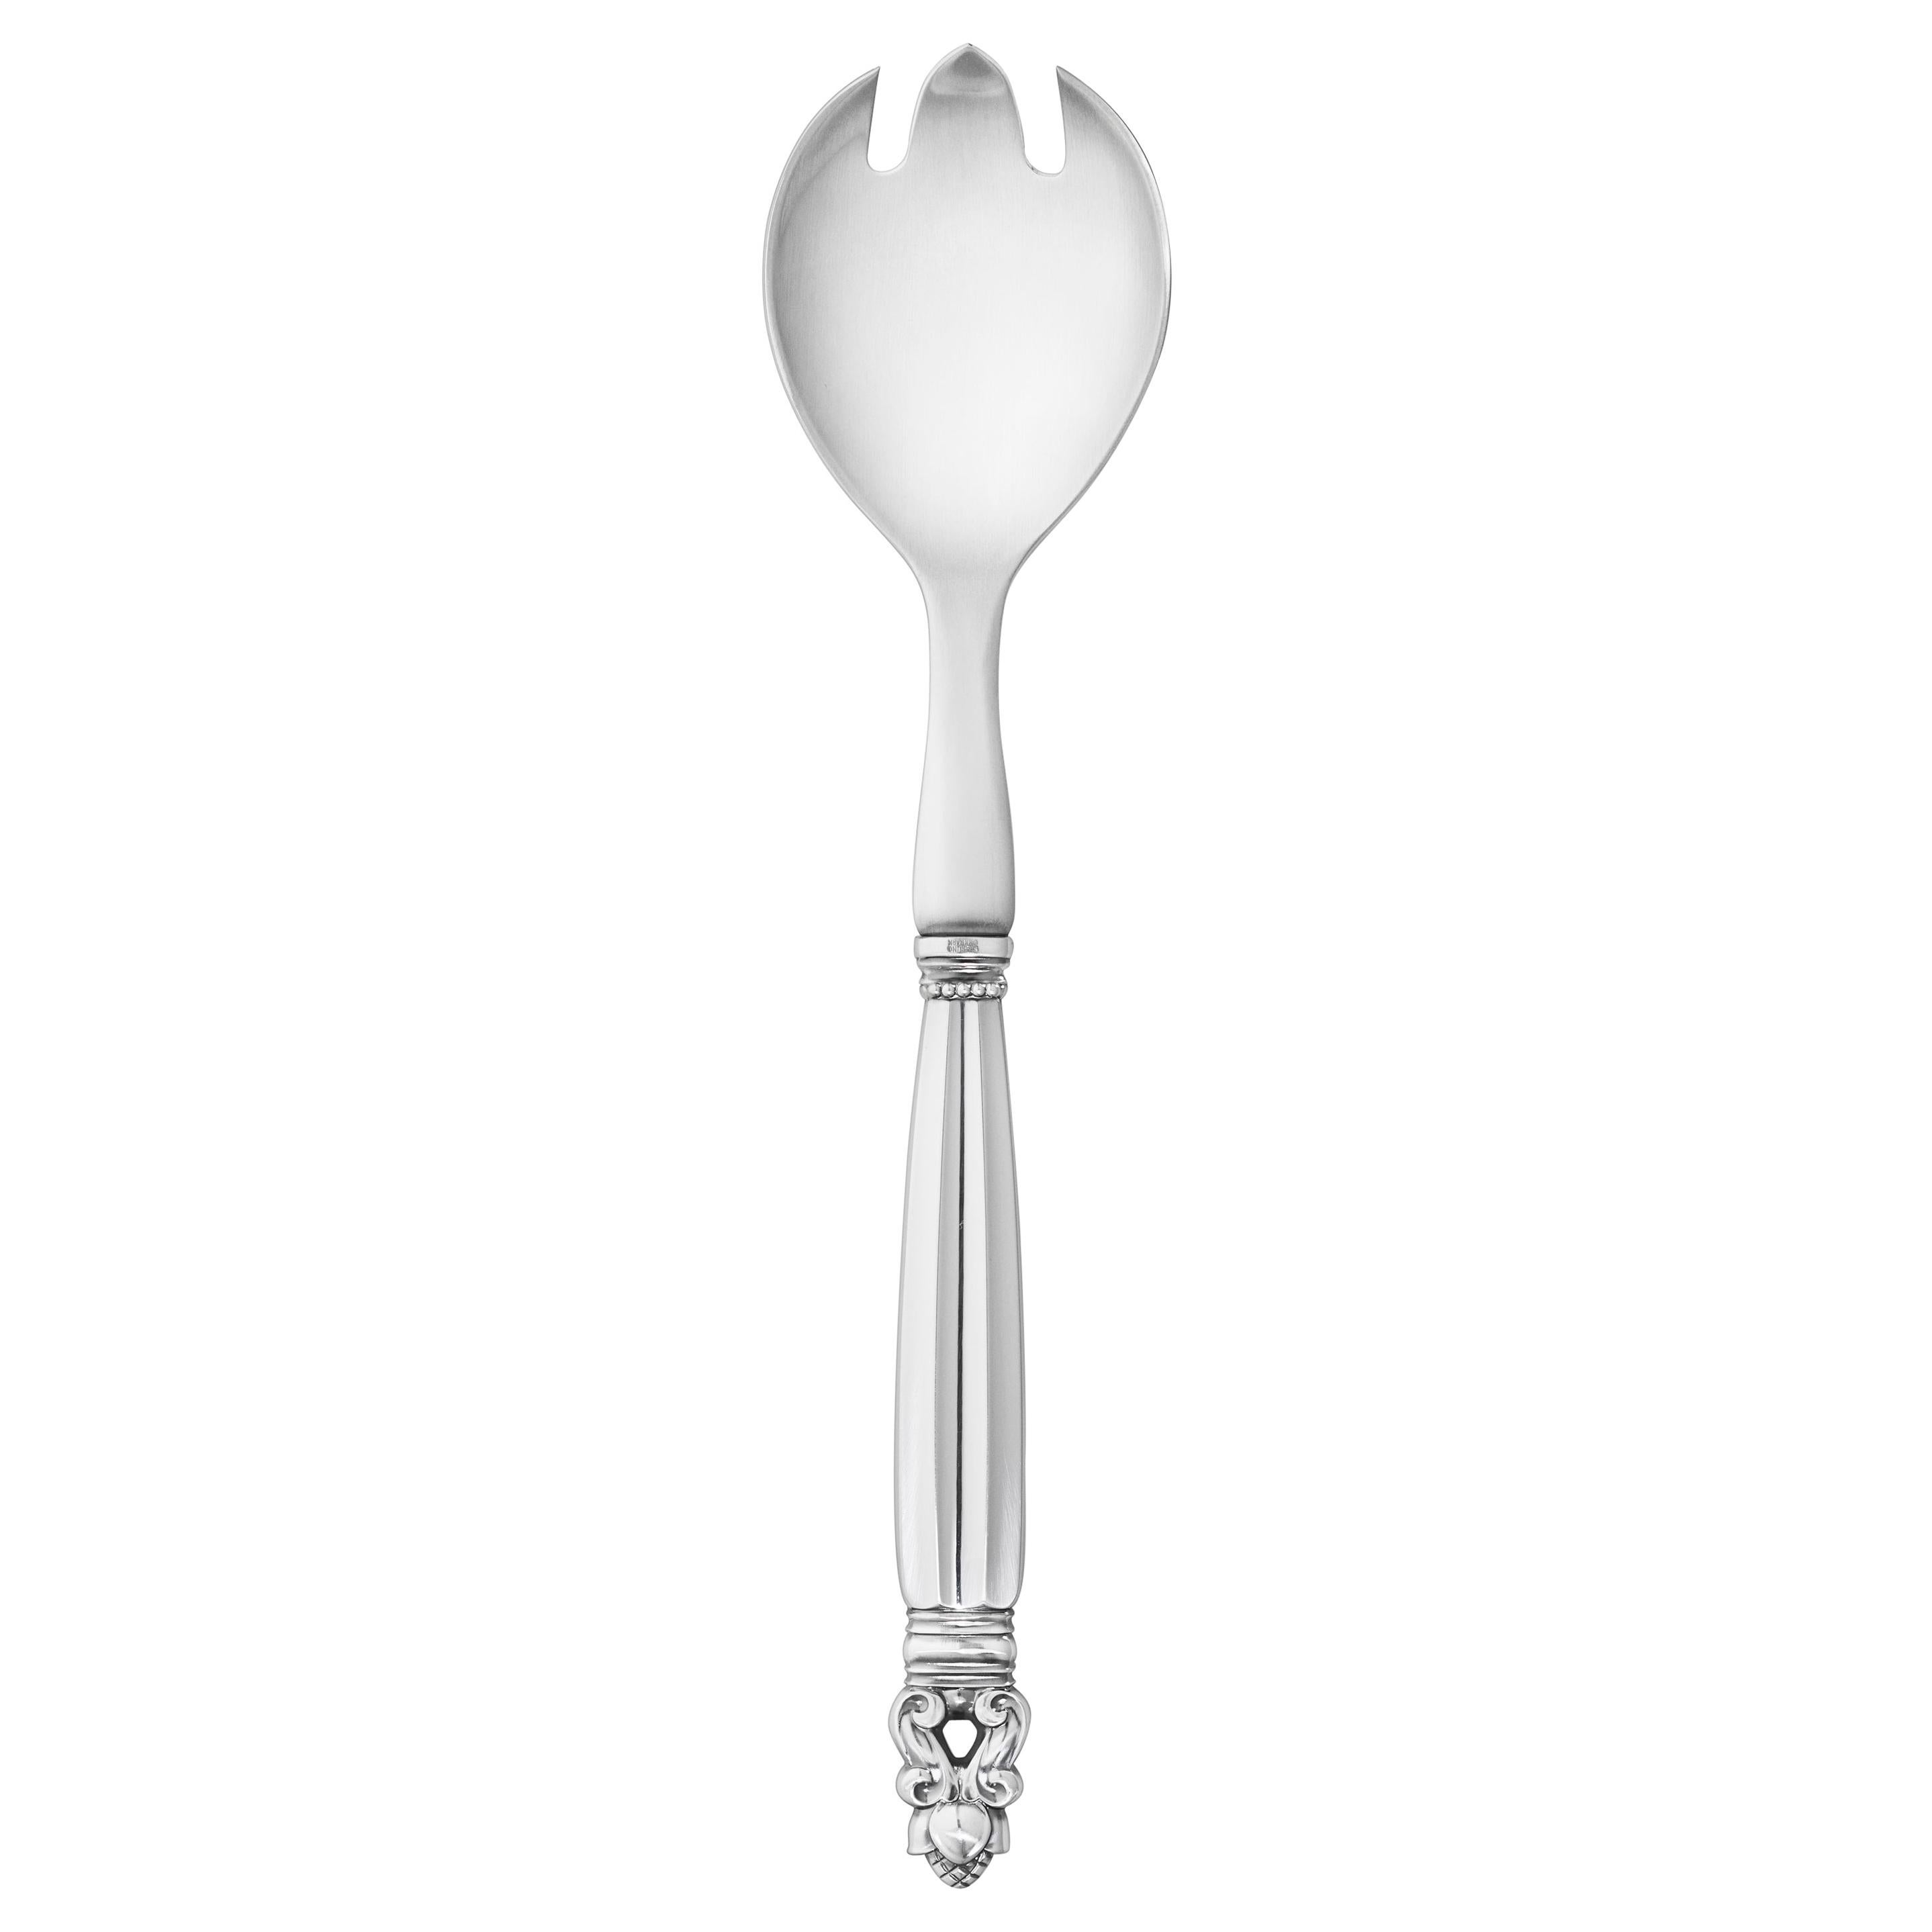 Georg Jensen Sterling Silver and Steel Acorn Salad Fork by Johan Rohde